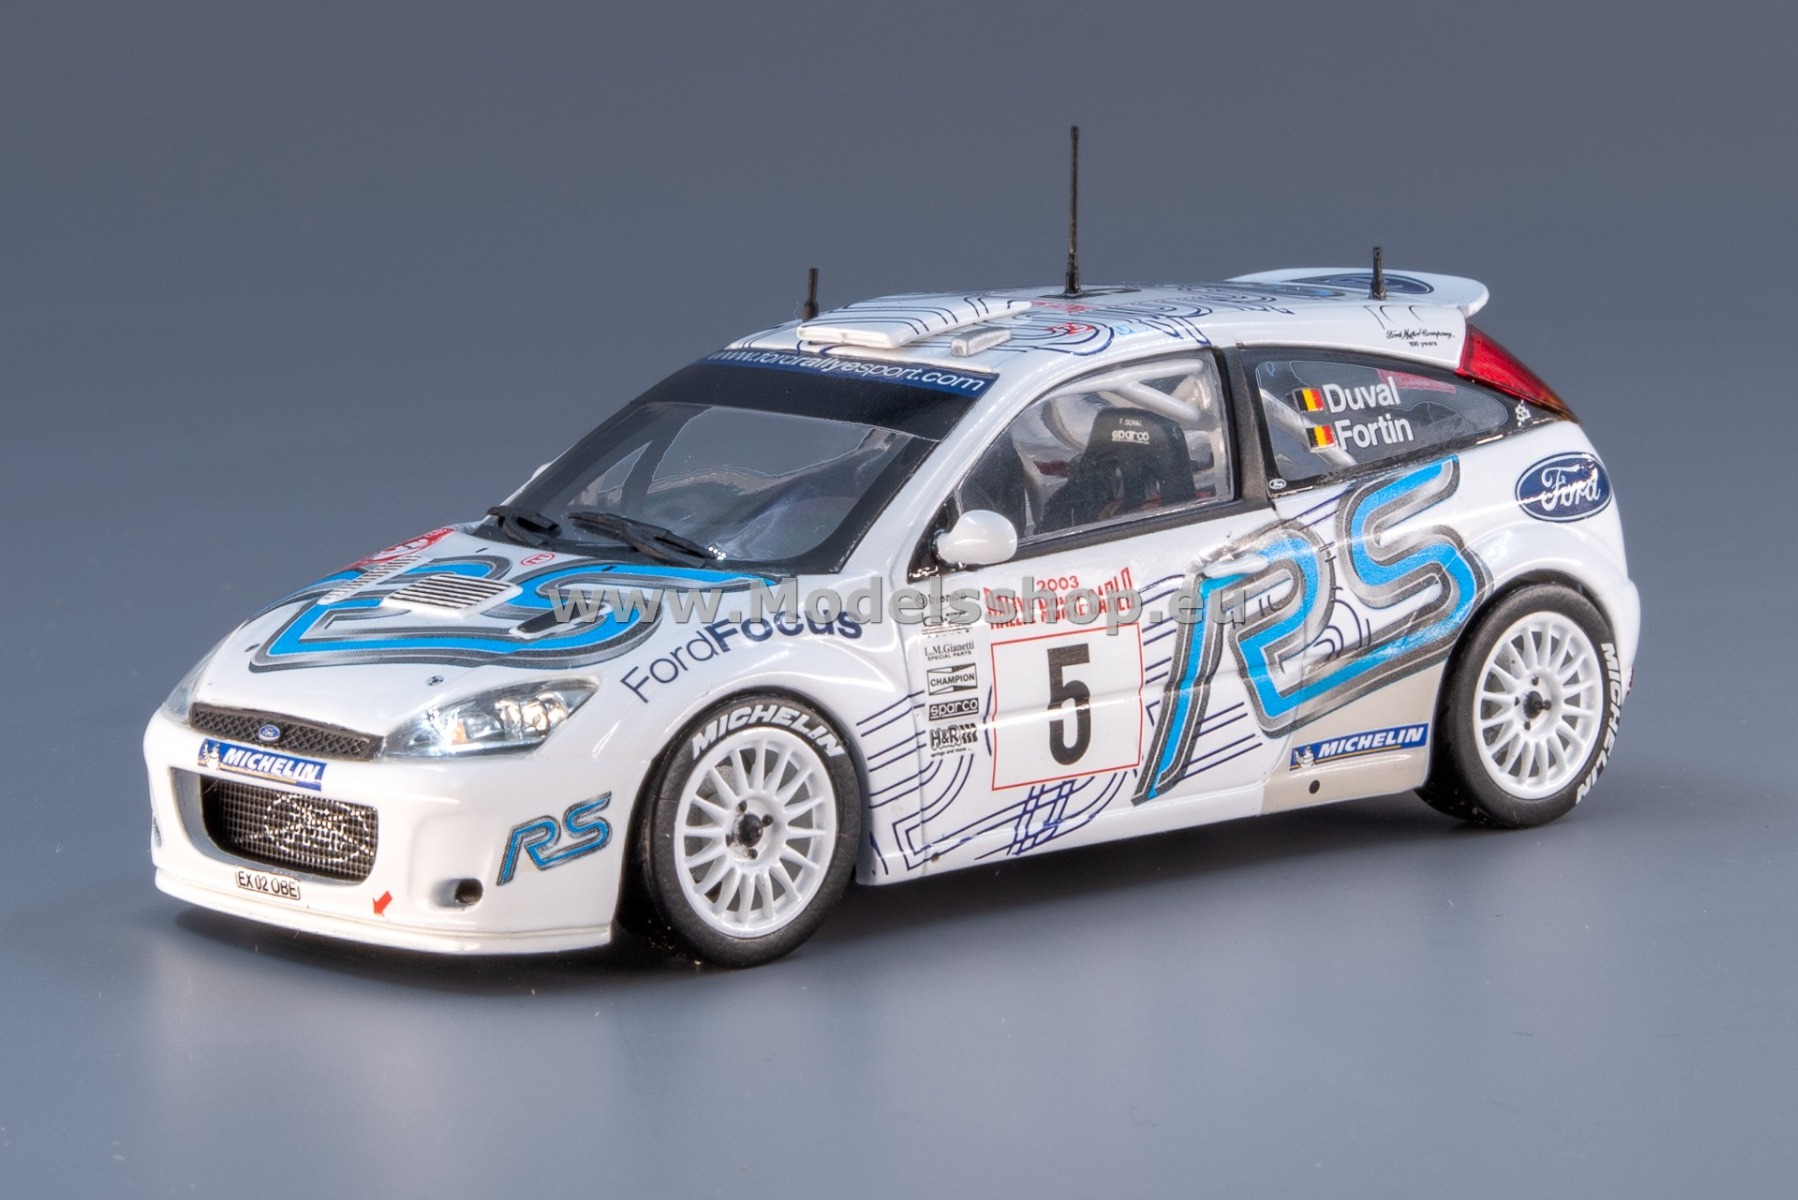 Minichamps 430038905 Ford Focus RS WRC, No. 5, Rally Monte Carlo 2003, Duval - Fortin